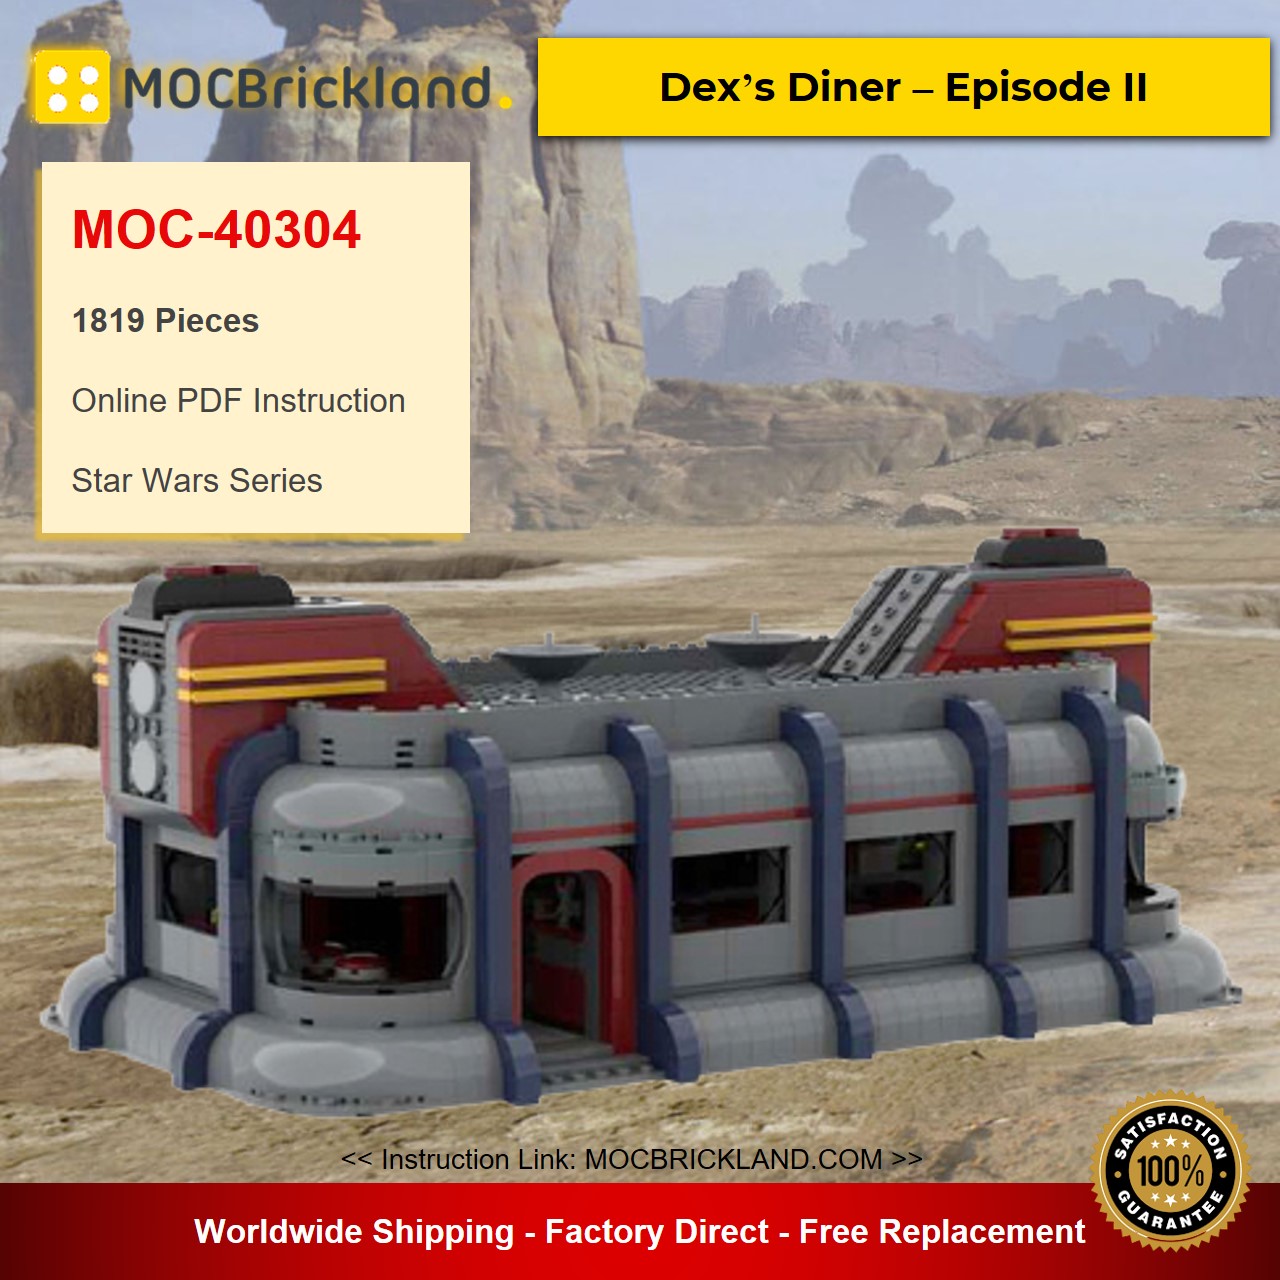 Dex’s Diner – Episode II MOC-40304 Star Wars Designed By 6211 With 1819 Pieces